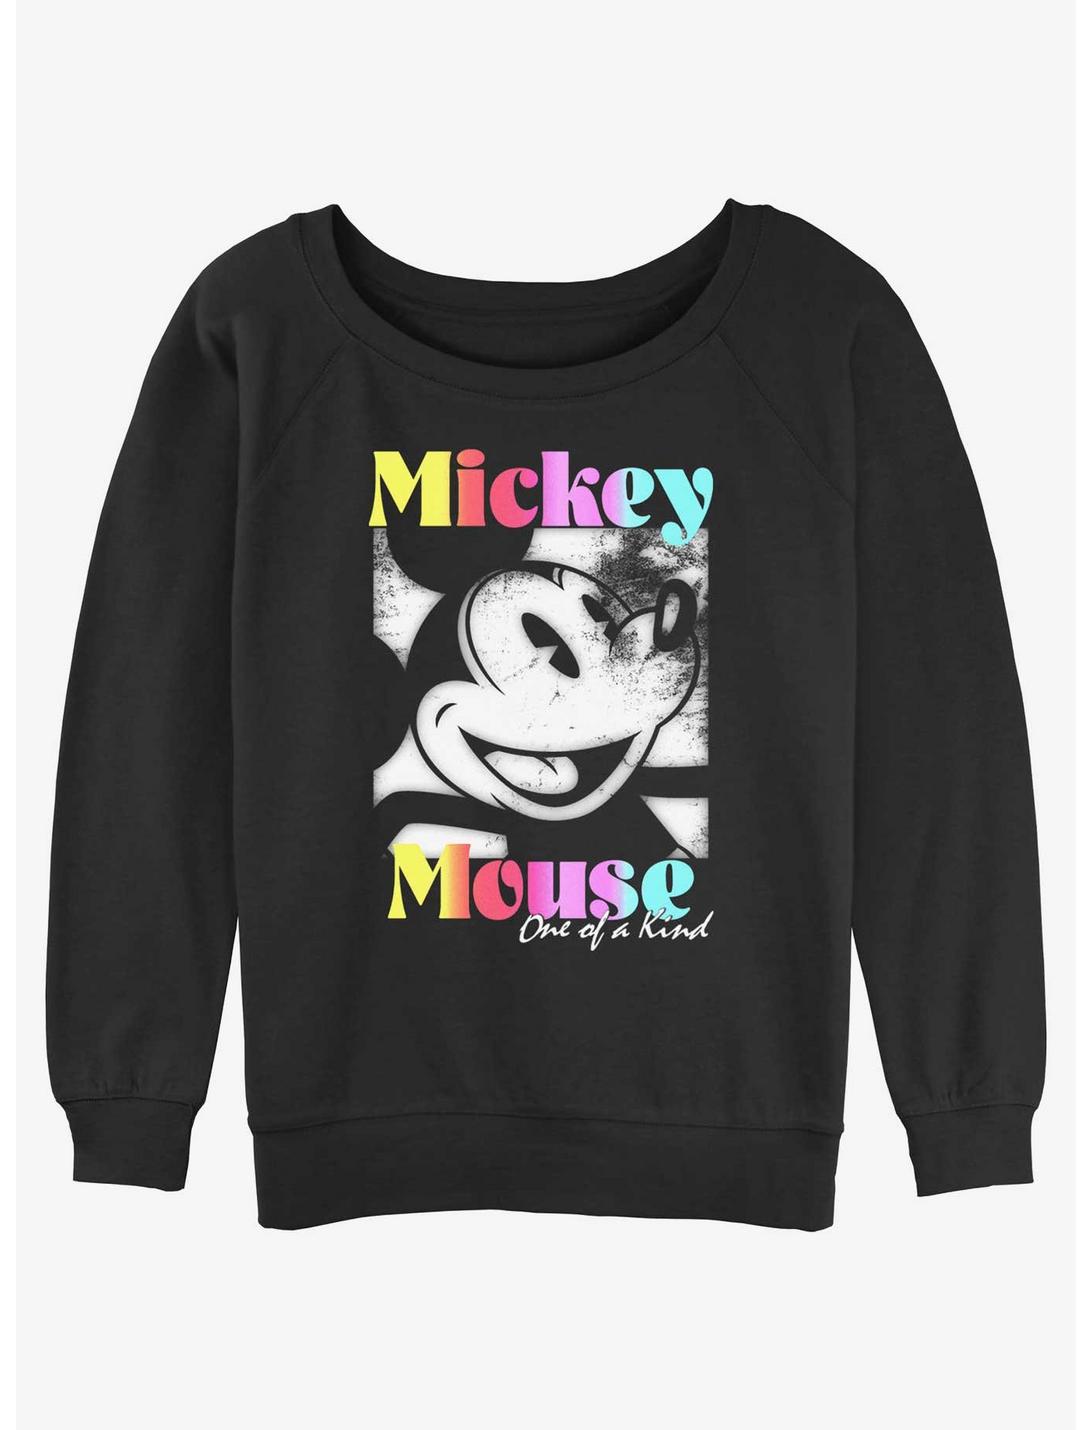 Disney Mickey Mouse one of a kind distressed Womens Slouchy Sweatshirt, BLACK, hi-res